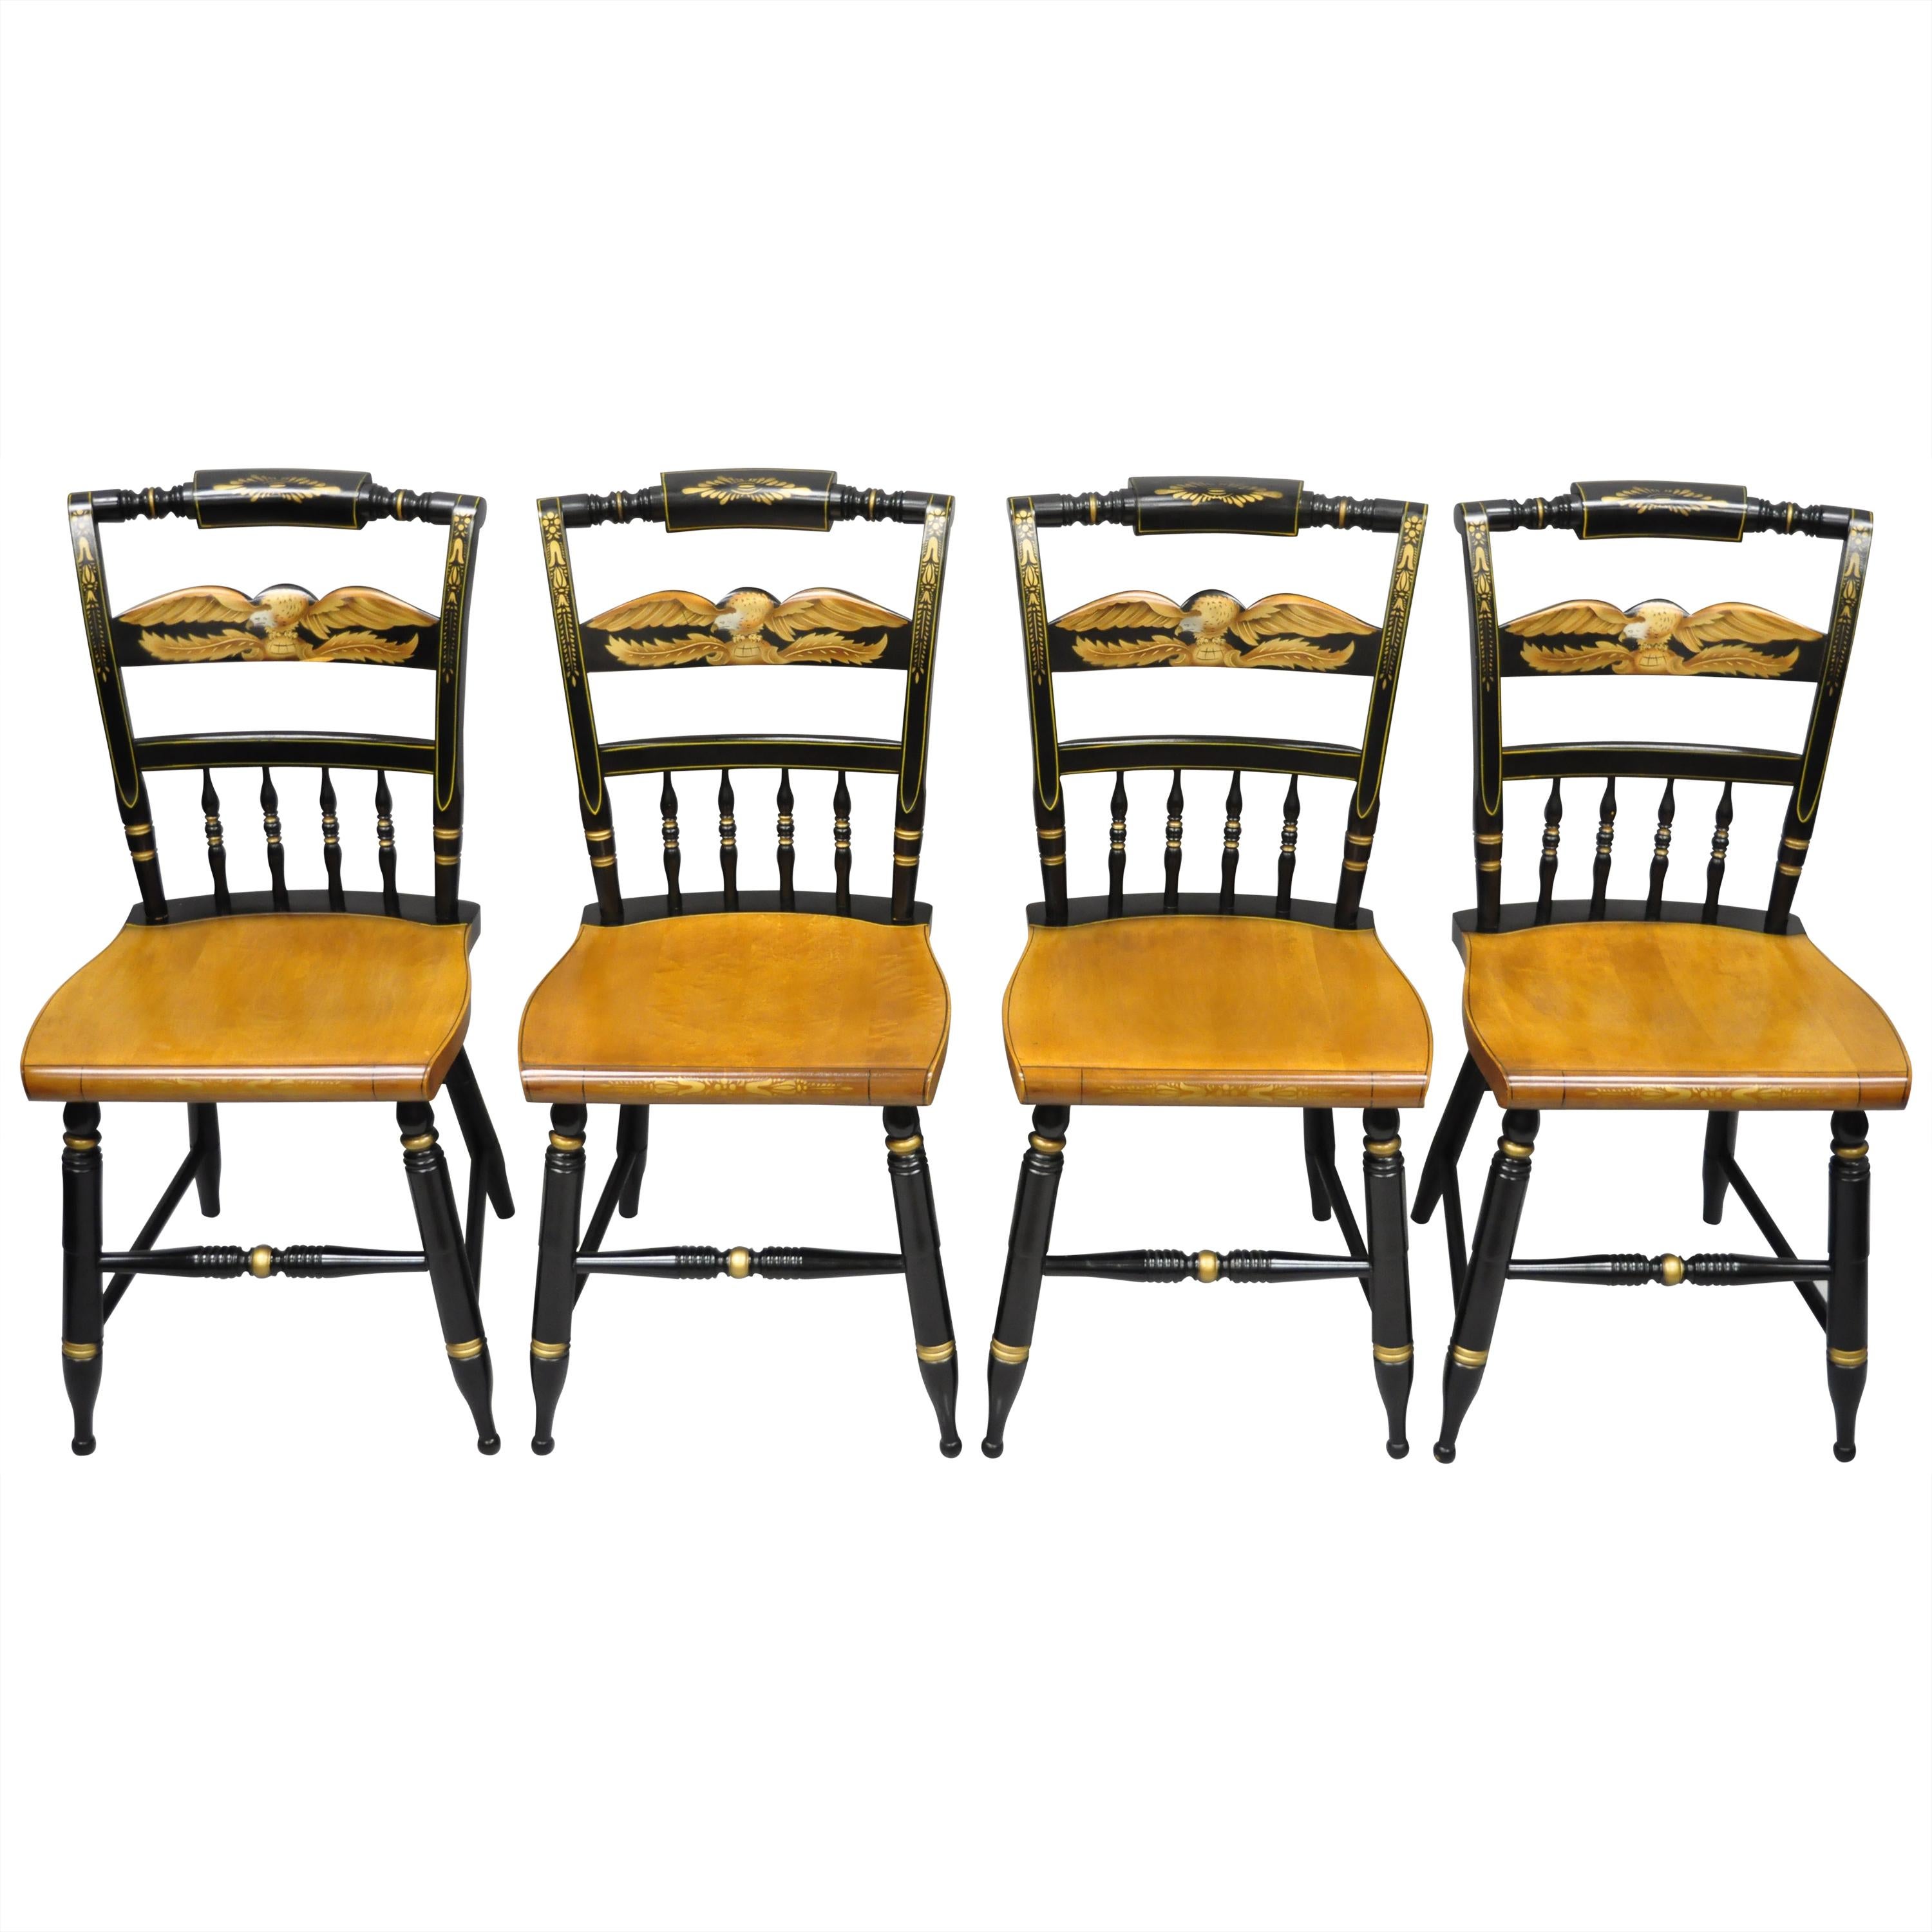 Set of 4 L. Hitchcock Gold Eagle Stencilled Painted Black Maple Dining Chair